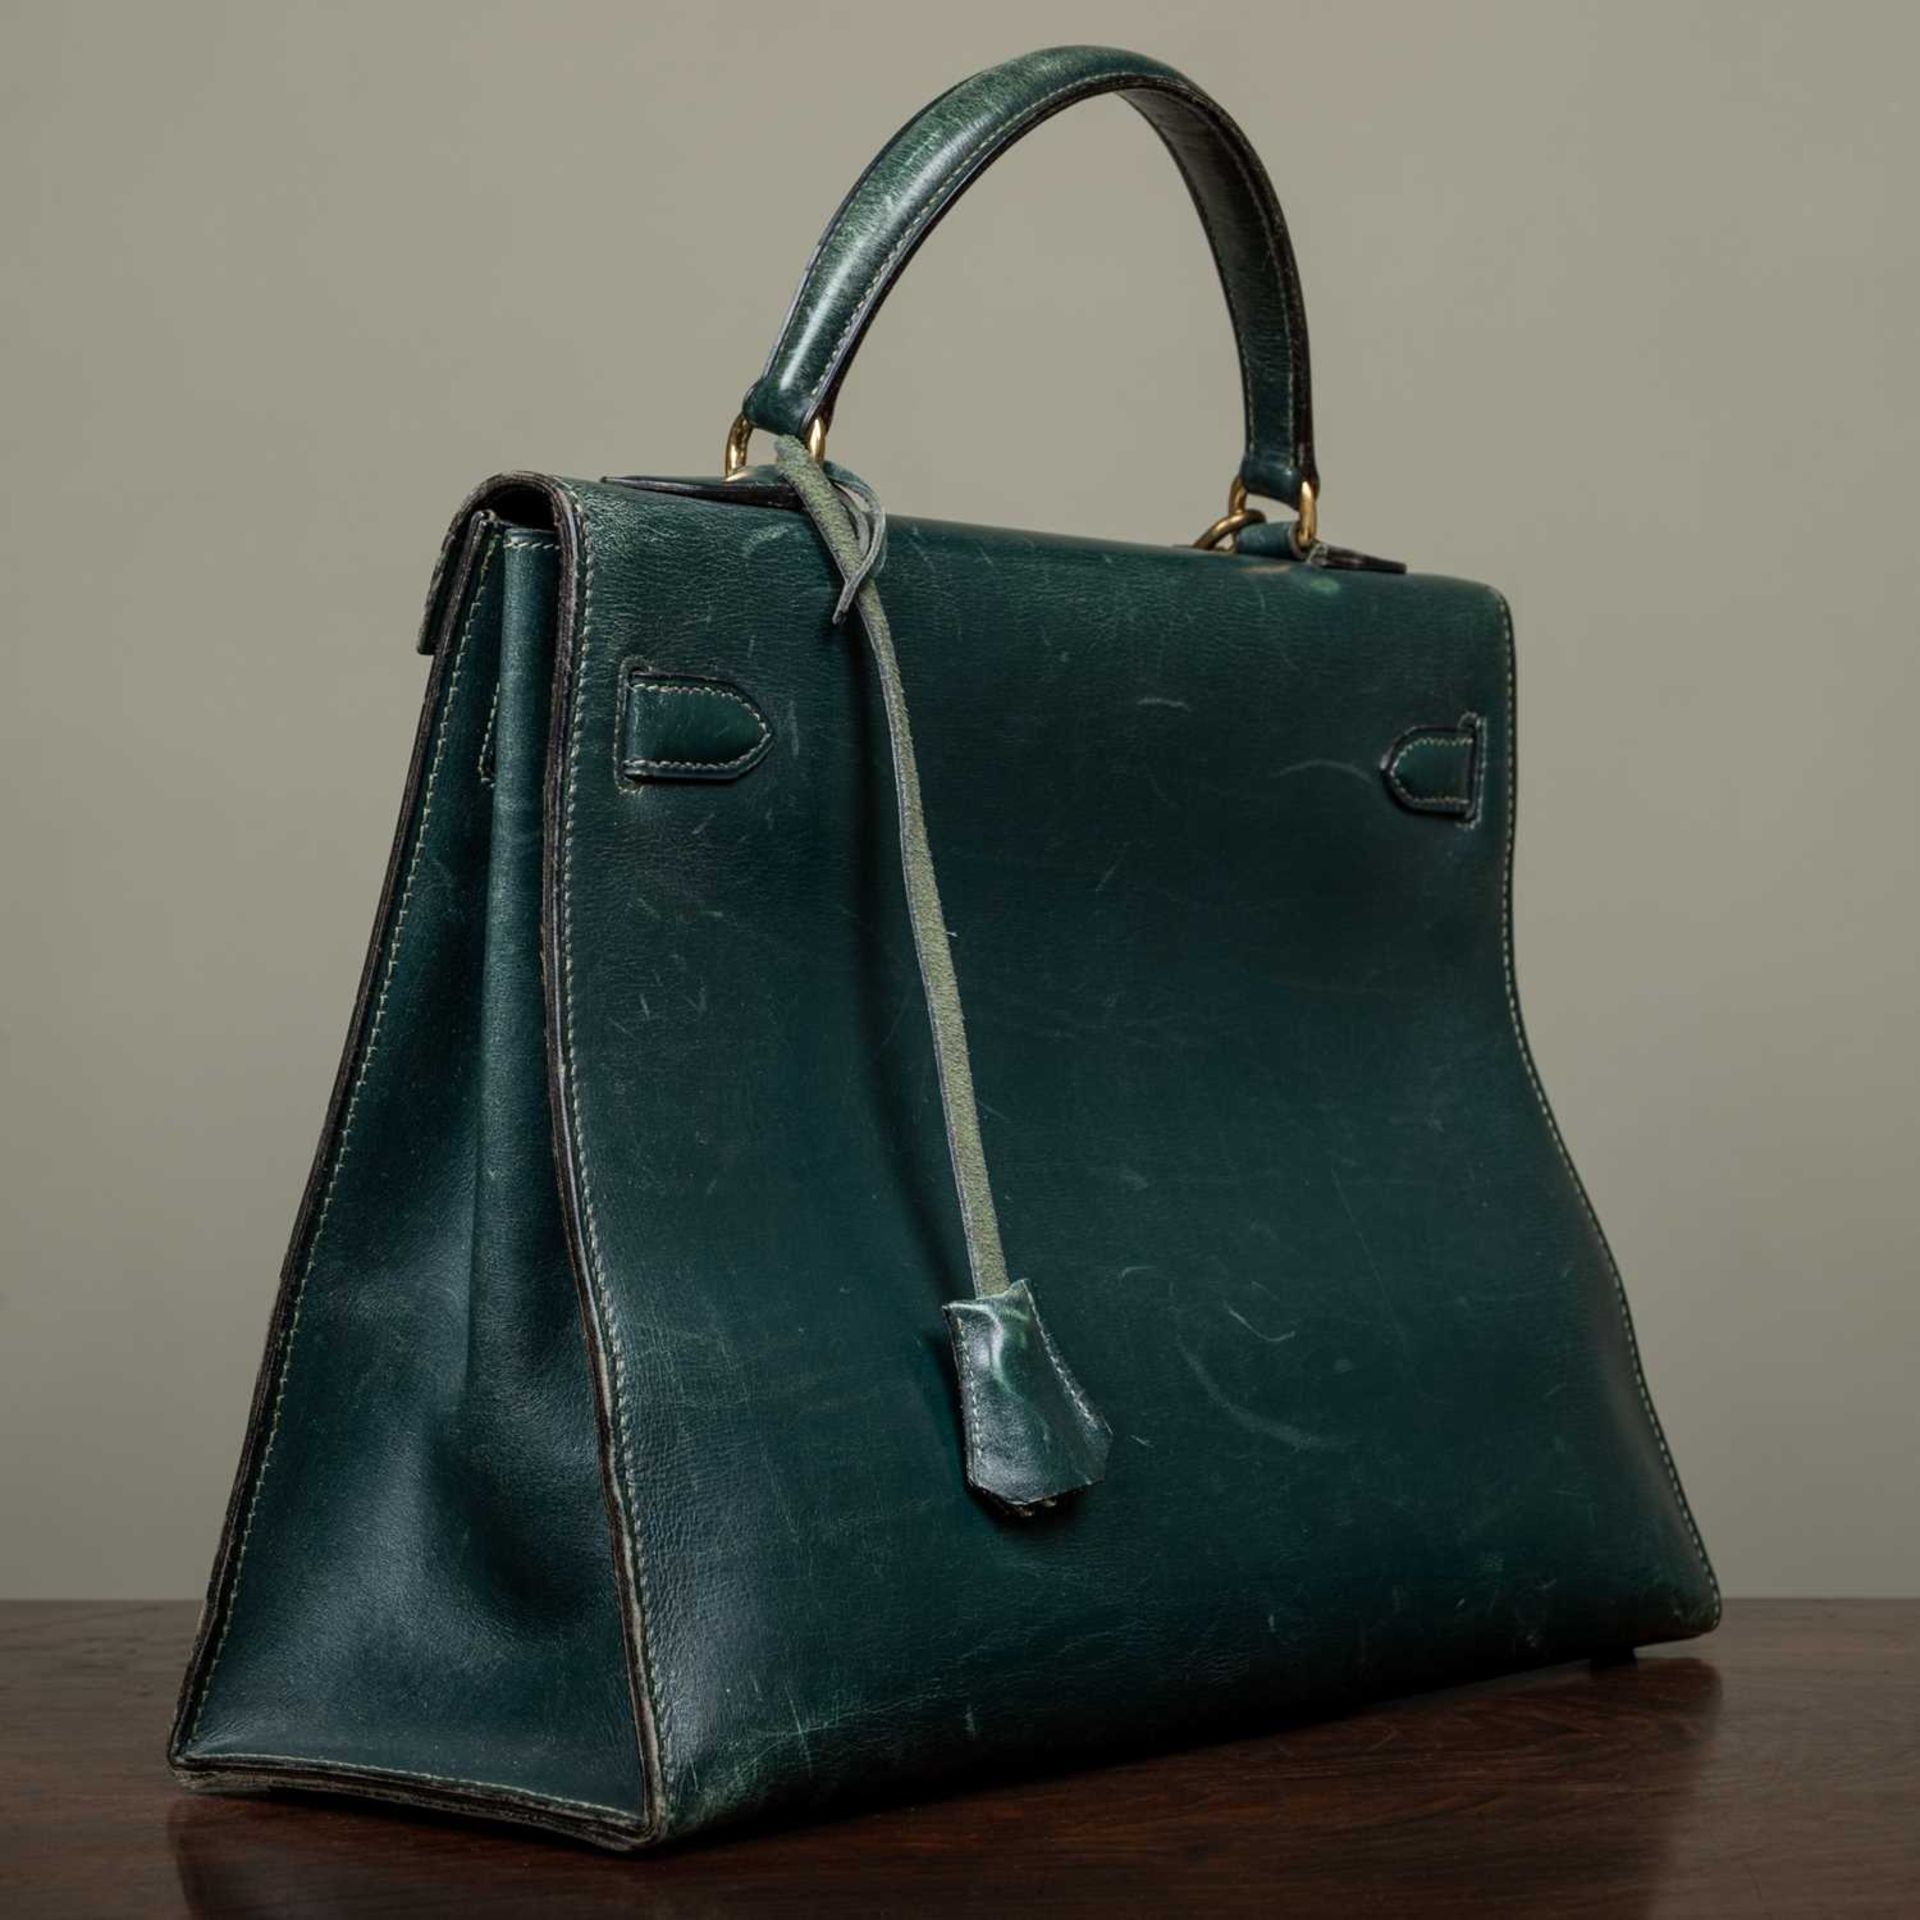 A Hermès 'Kelly' green leather handbag and matching jewellery case, the bag 33cm wide at the base - Image 6 of 18